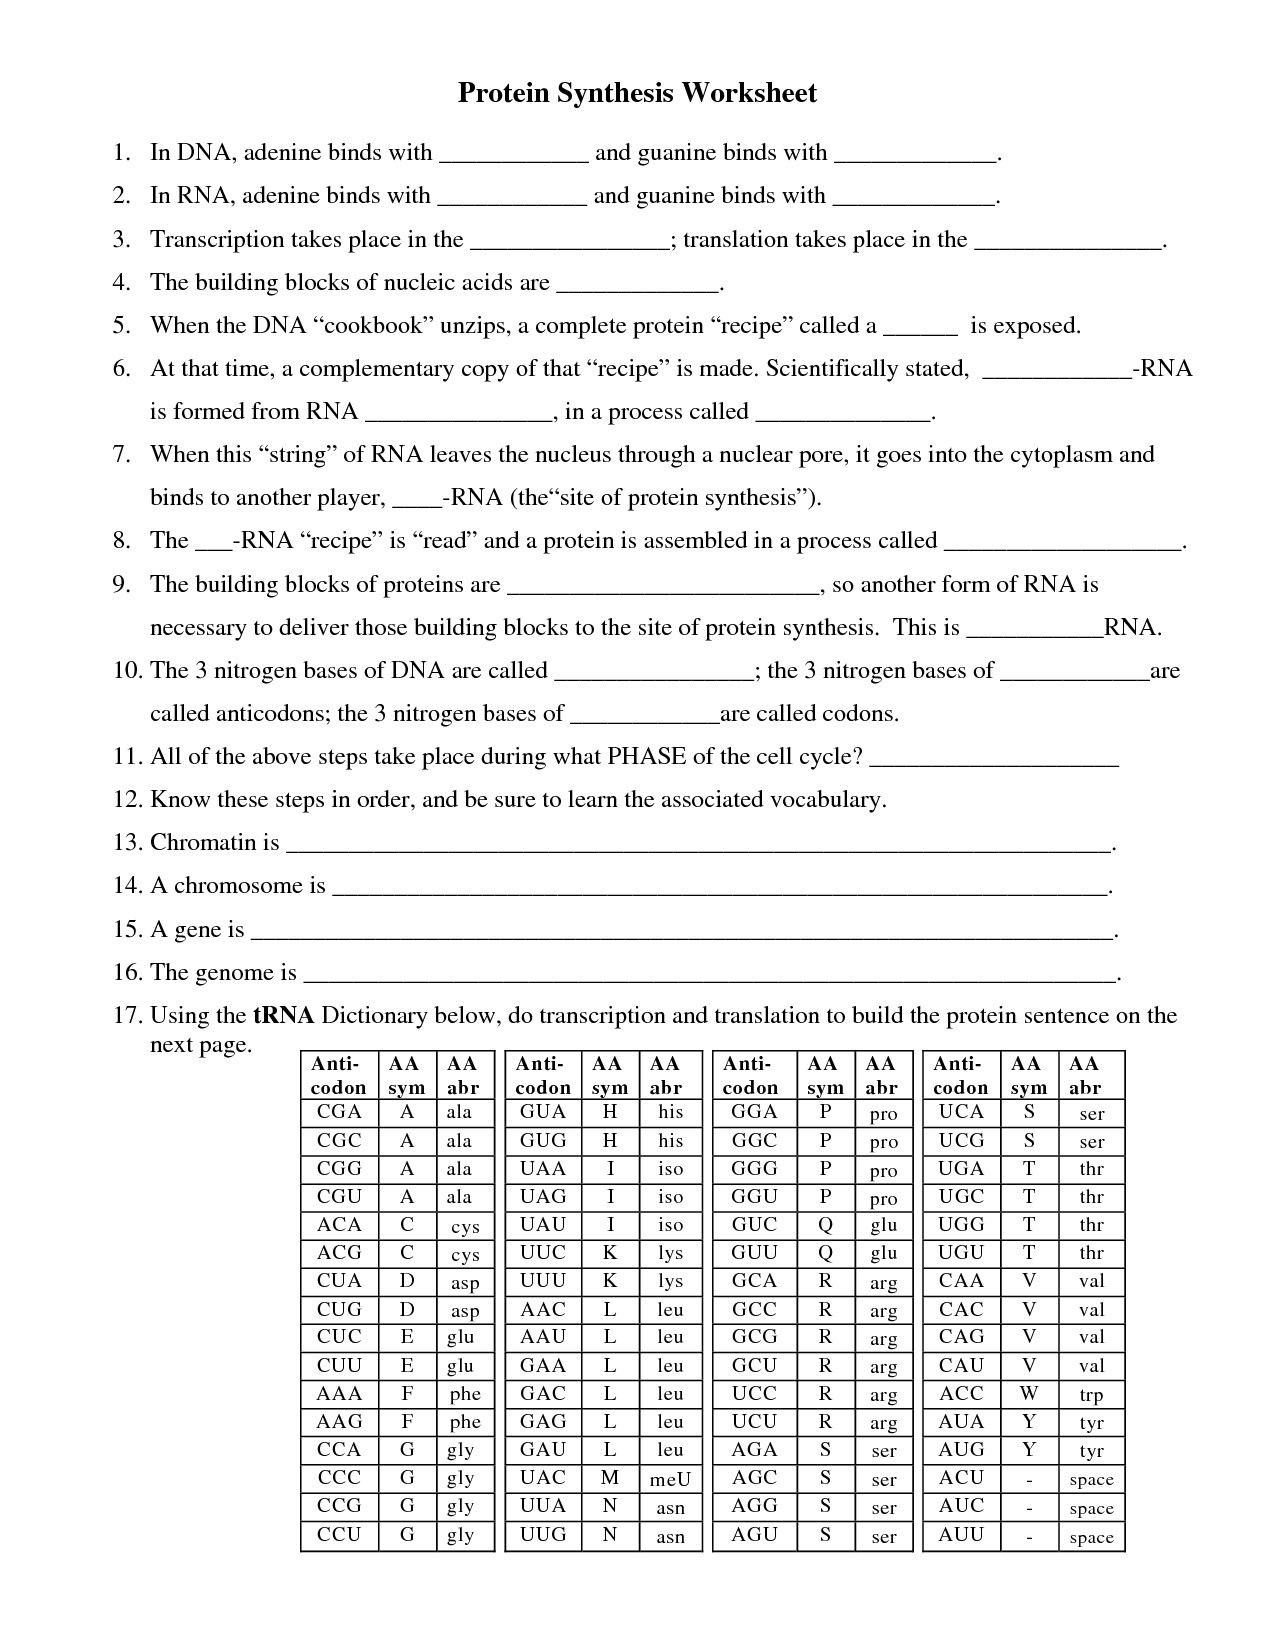 Dna Mutations Practice Worksheet Answers Prime Dna and Protein Synthesis Worksheet Answers